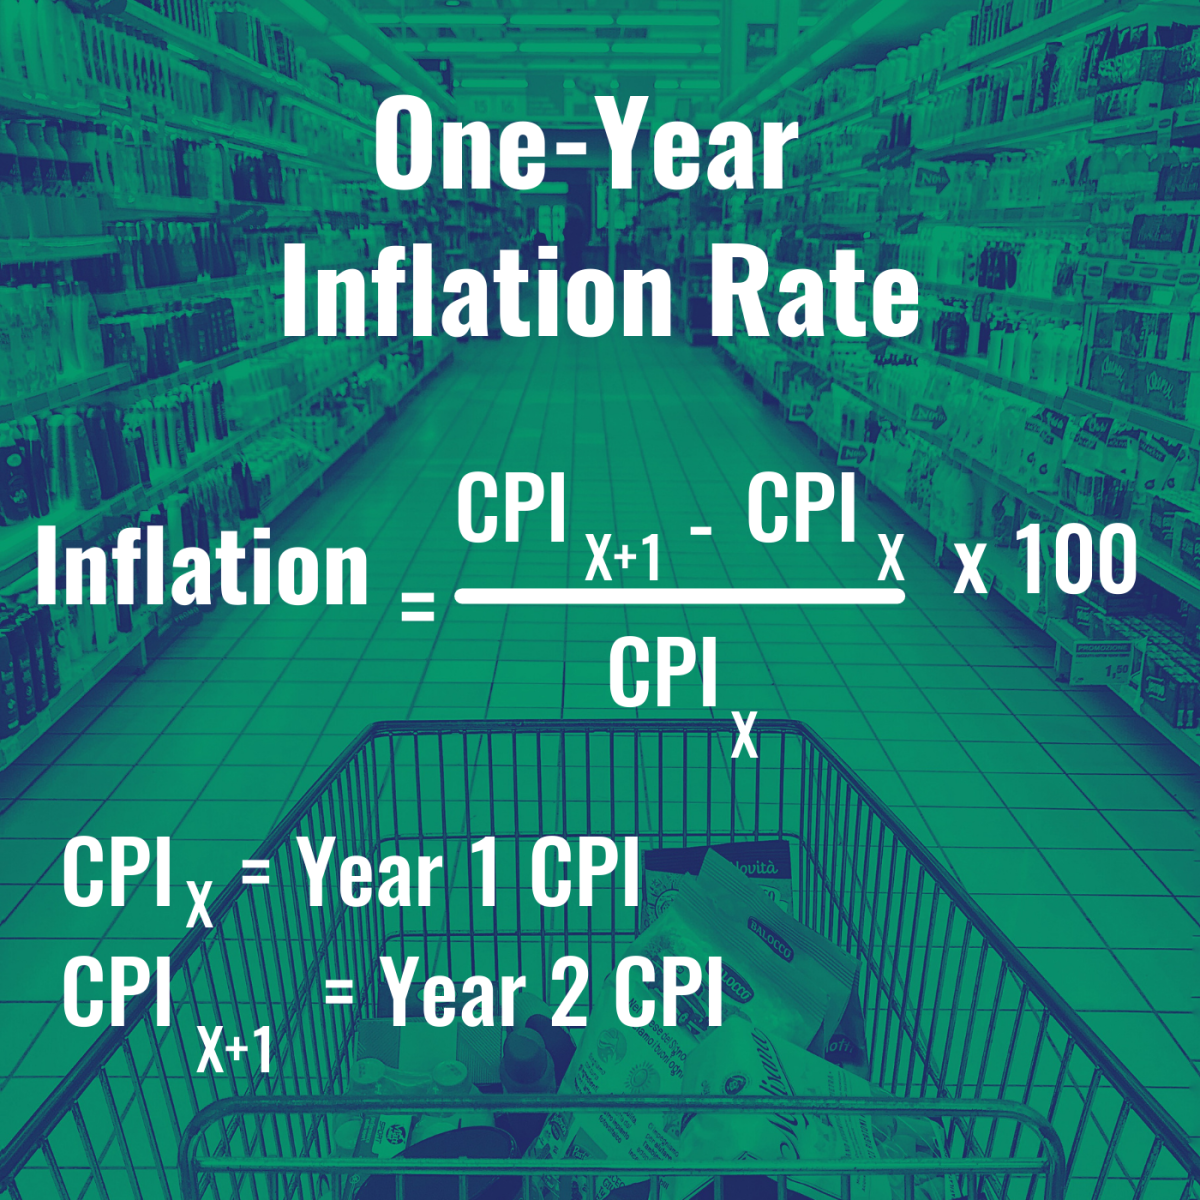 This is how you calculate the yearly inflation rate.